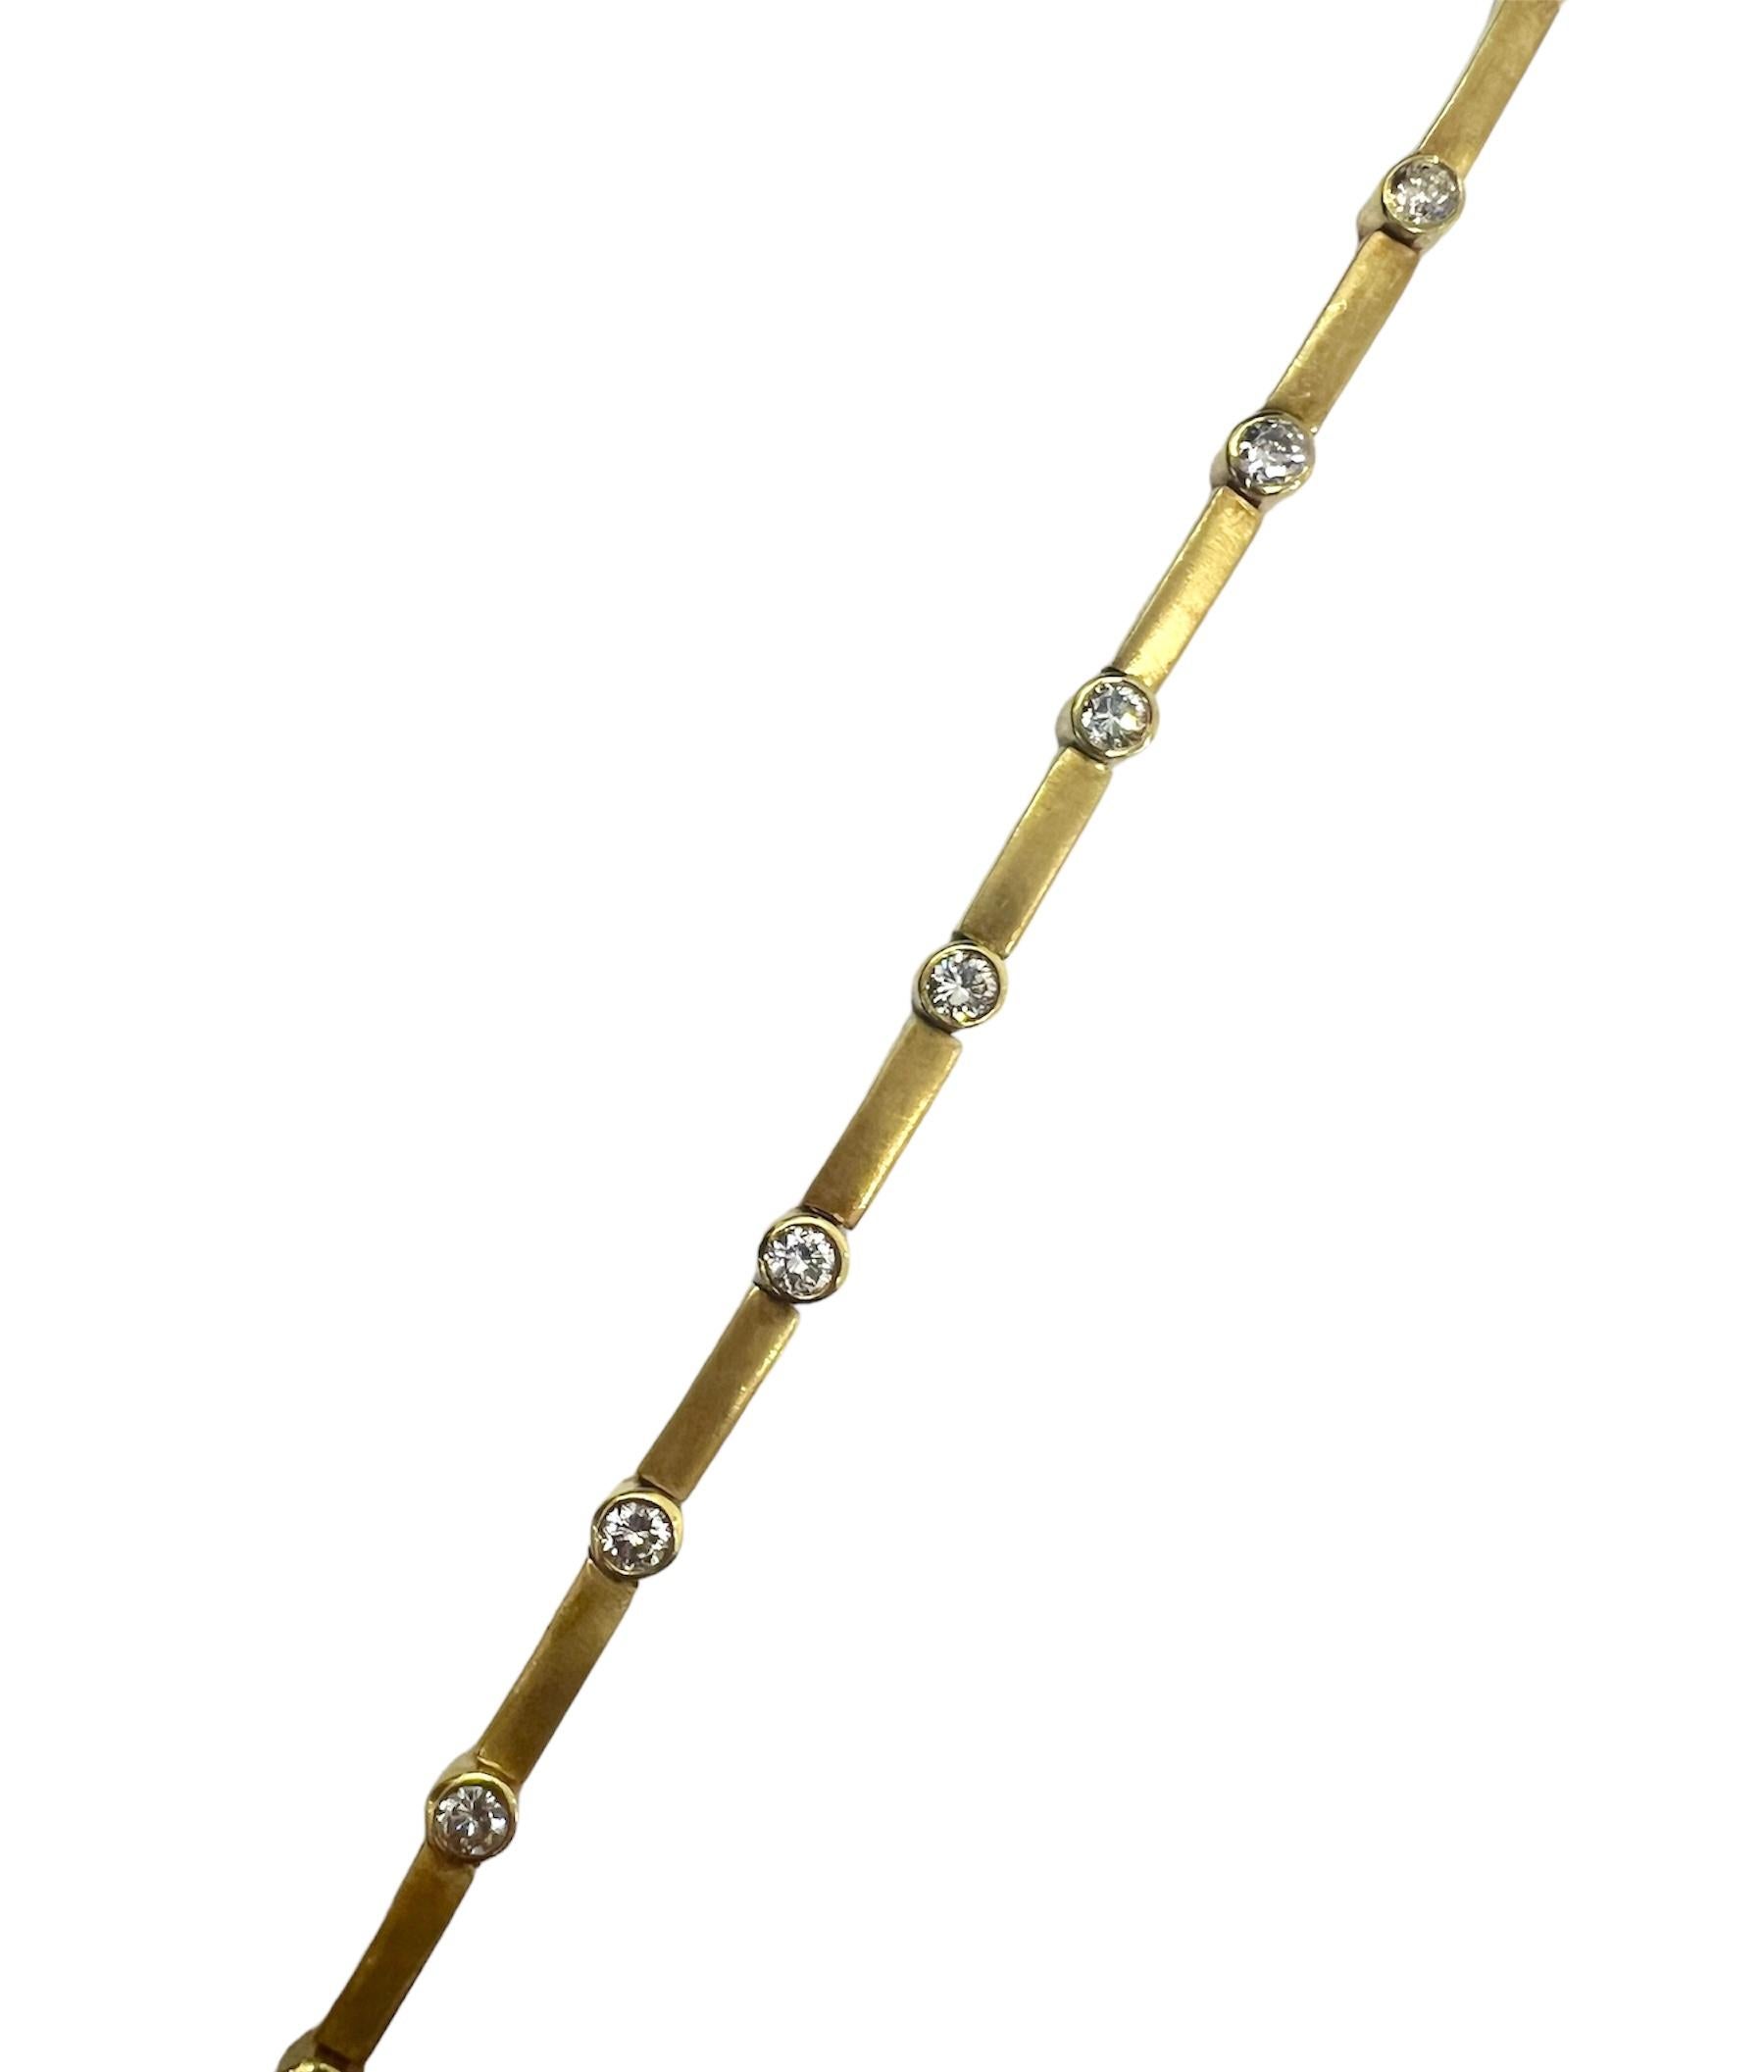 18K yellow gold bracelet with 2.15 carat diamonds.

Sophia D by Joseph Dardashti LTD has been known worldwide for 35 years and are inspired by classic Art Deco design that merges with modern manufacturing techniques.
